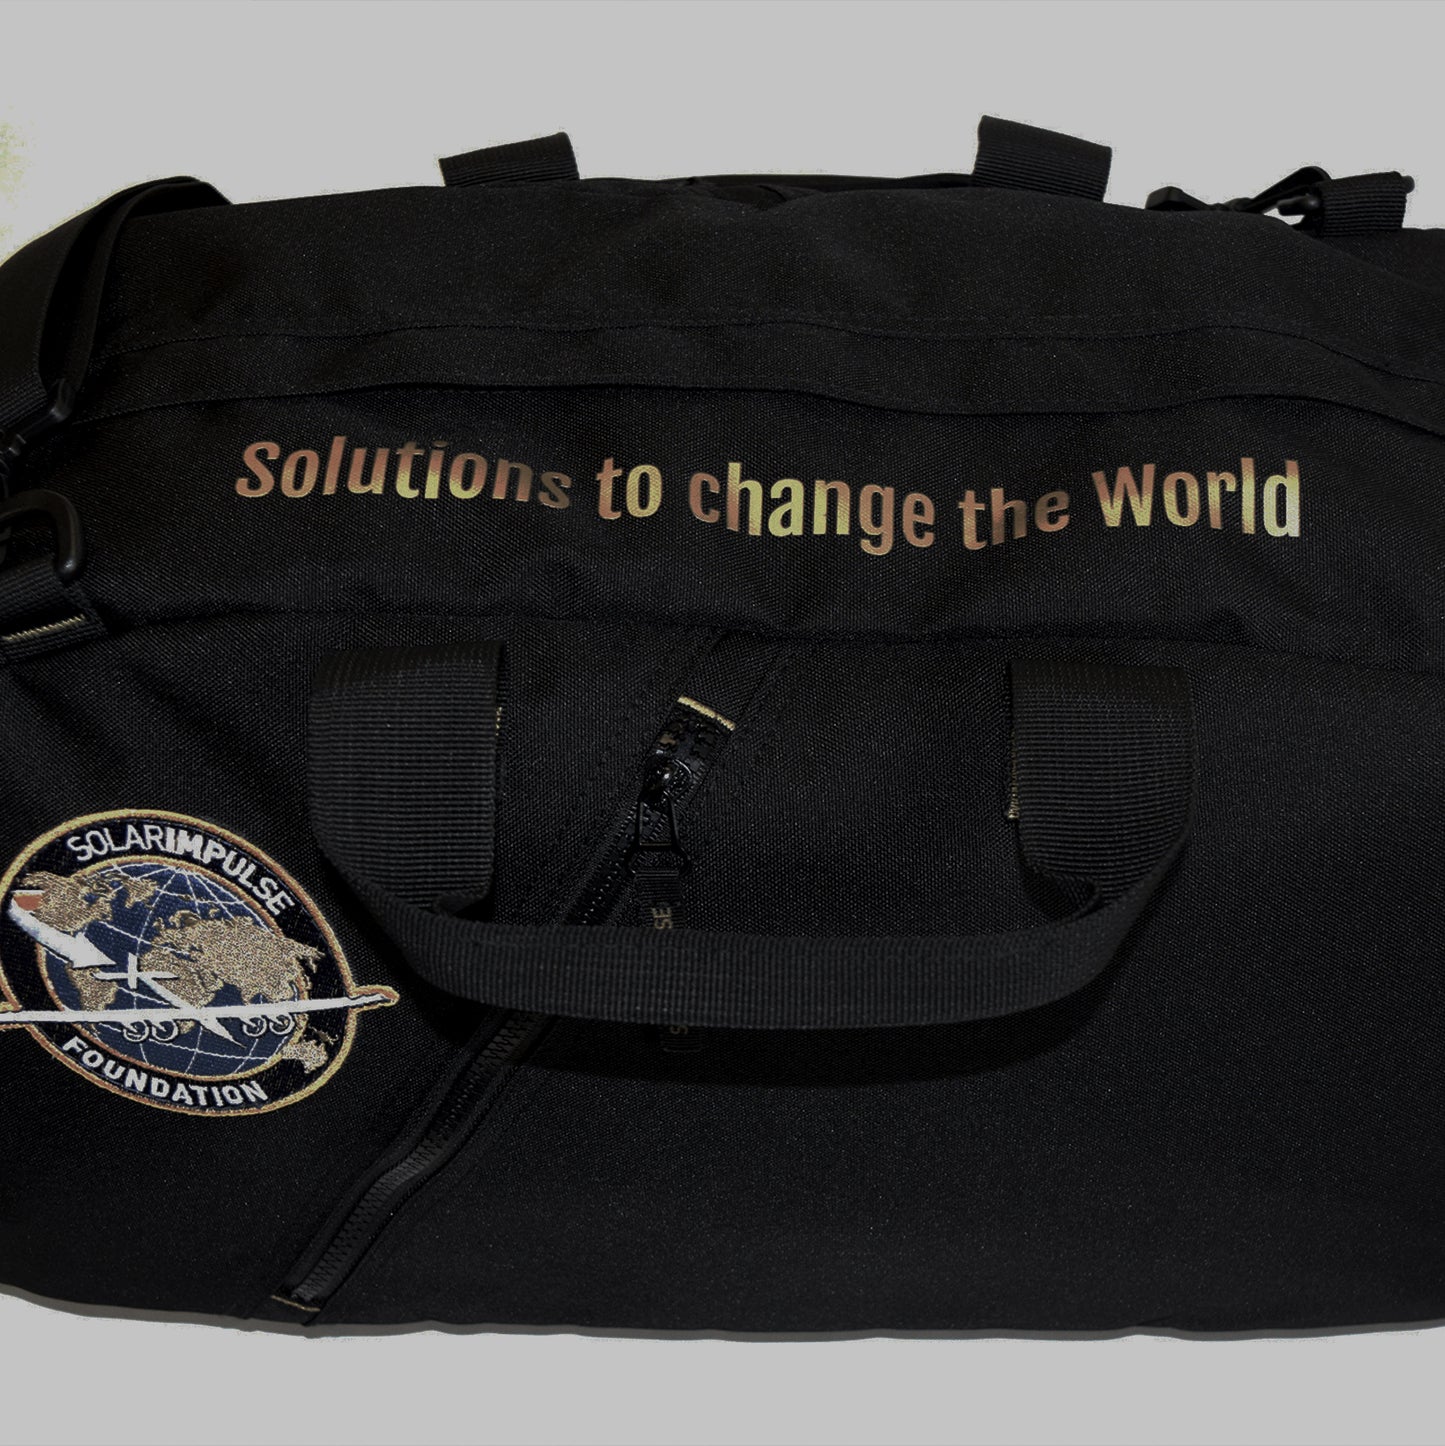 SPORT BAG & BACKPACK - RECYCLED POLYESTER